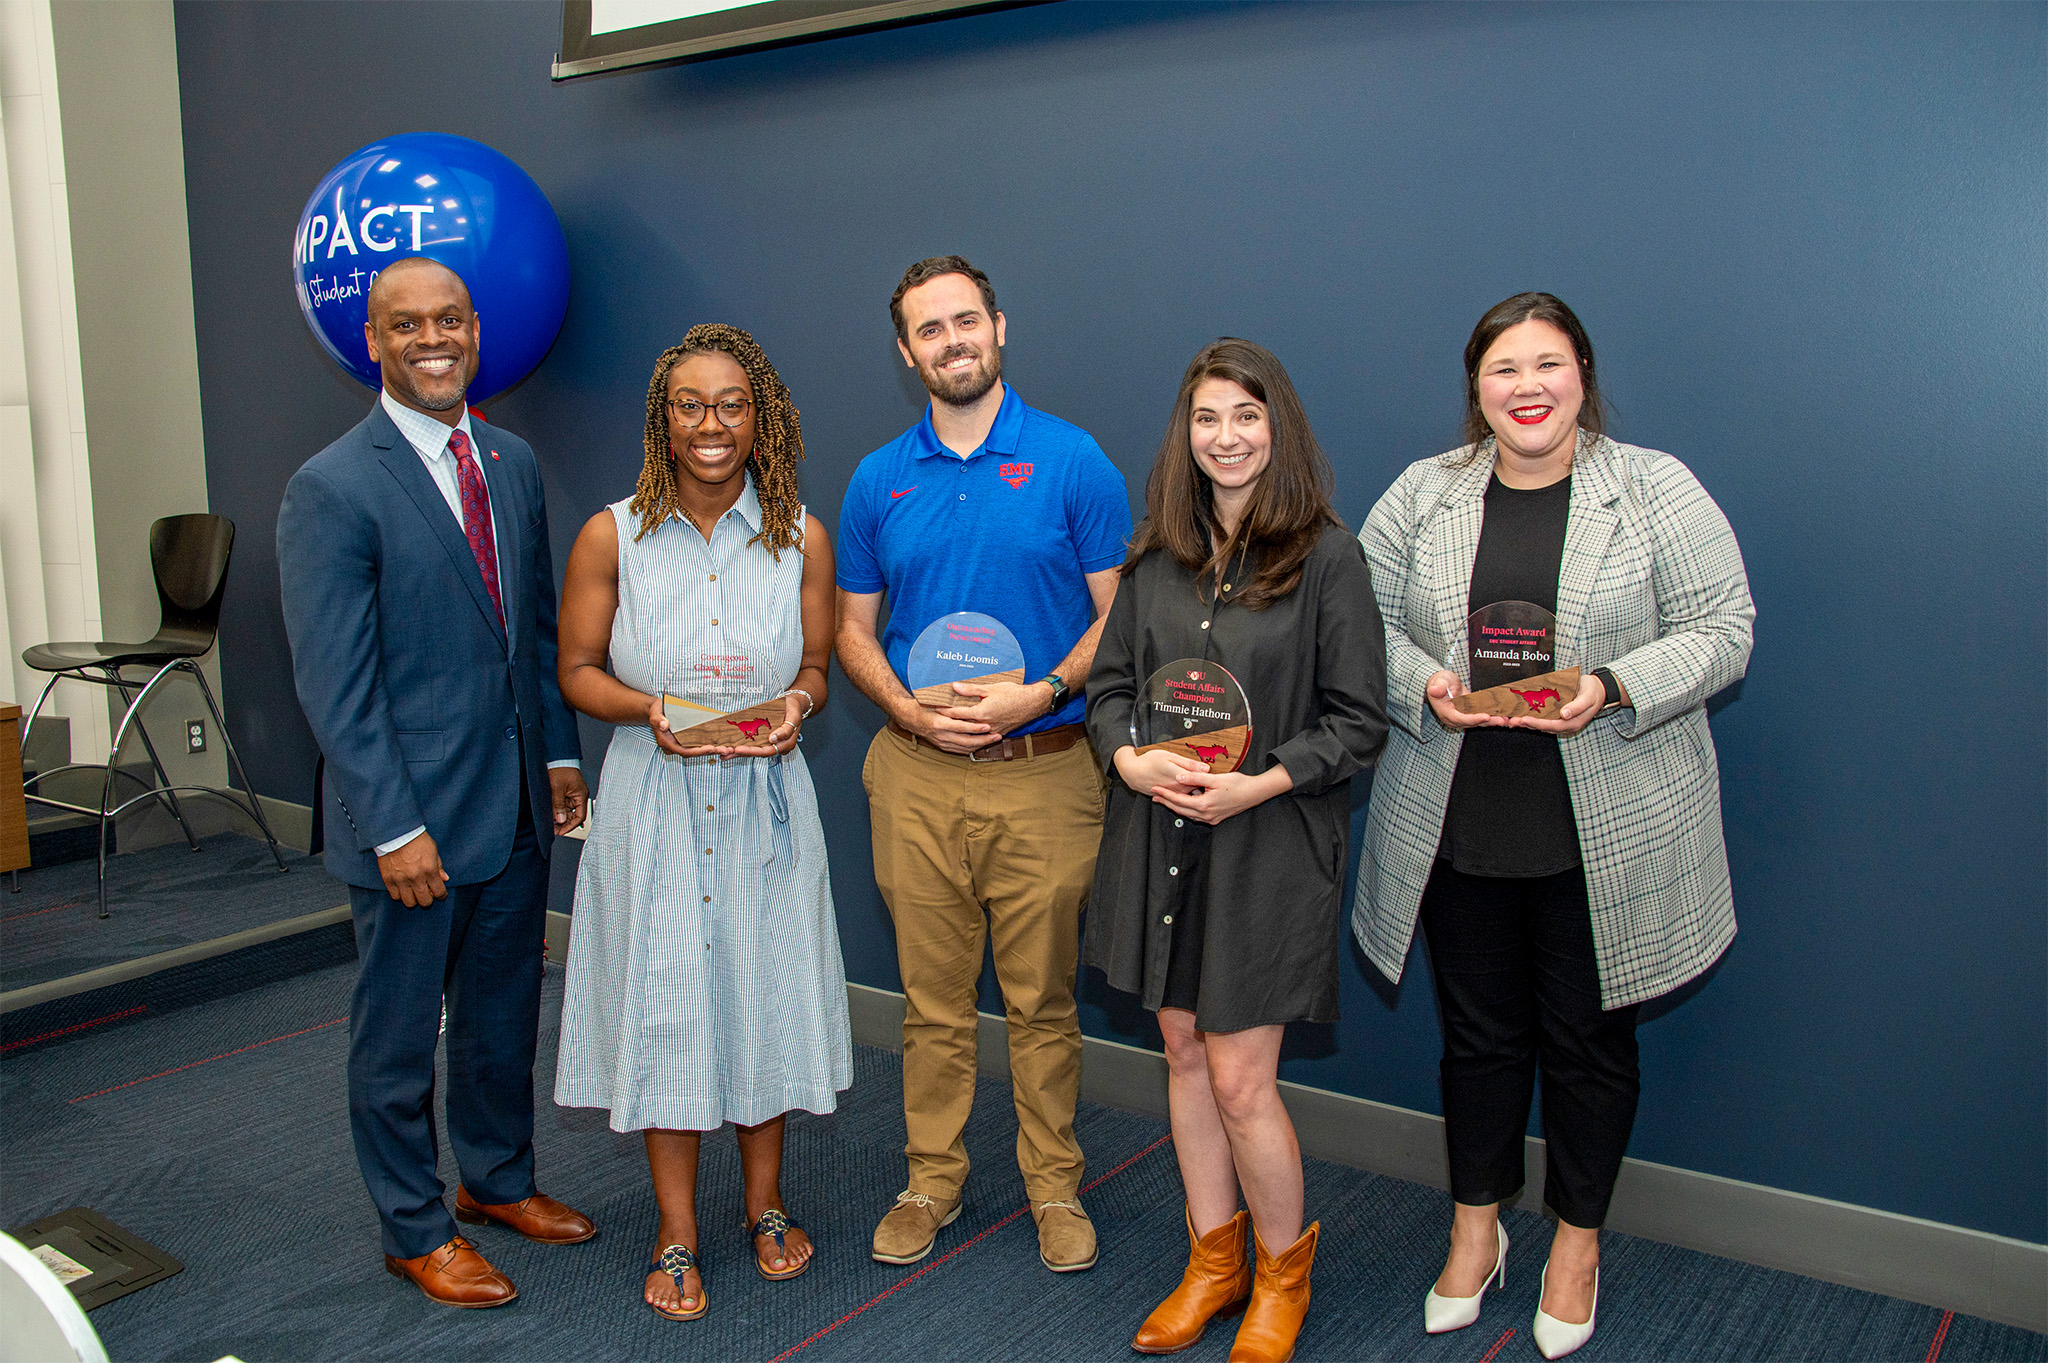 five people standing in front of blue wall holding award plaques